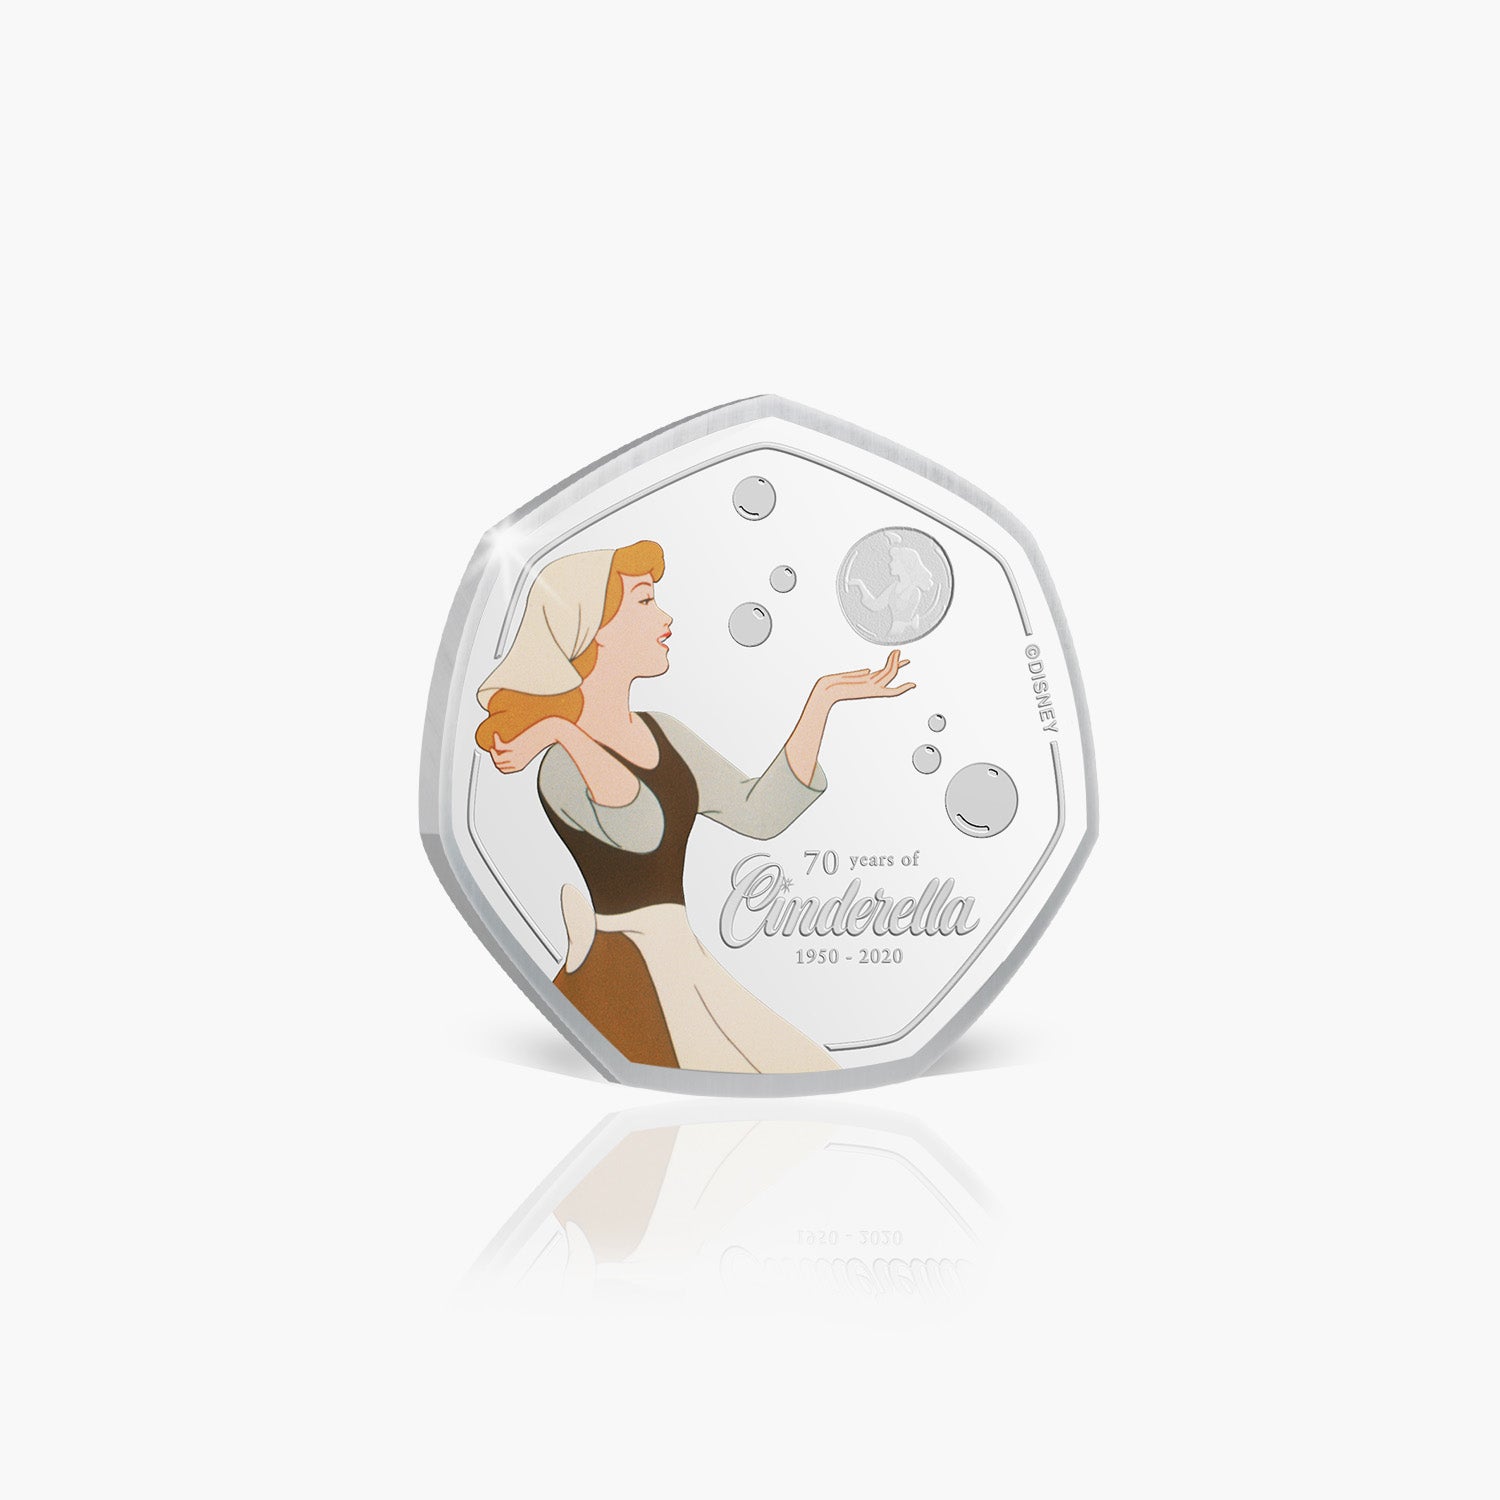 Keep On Believing Silver Plated Coin